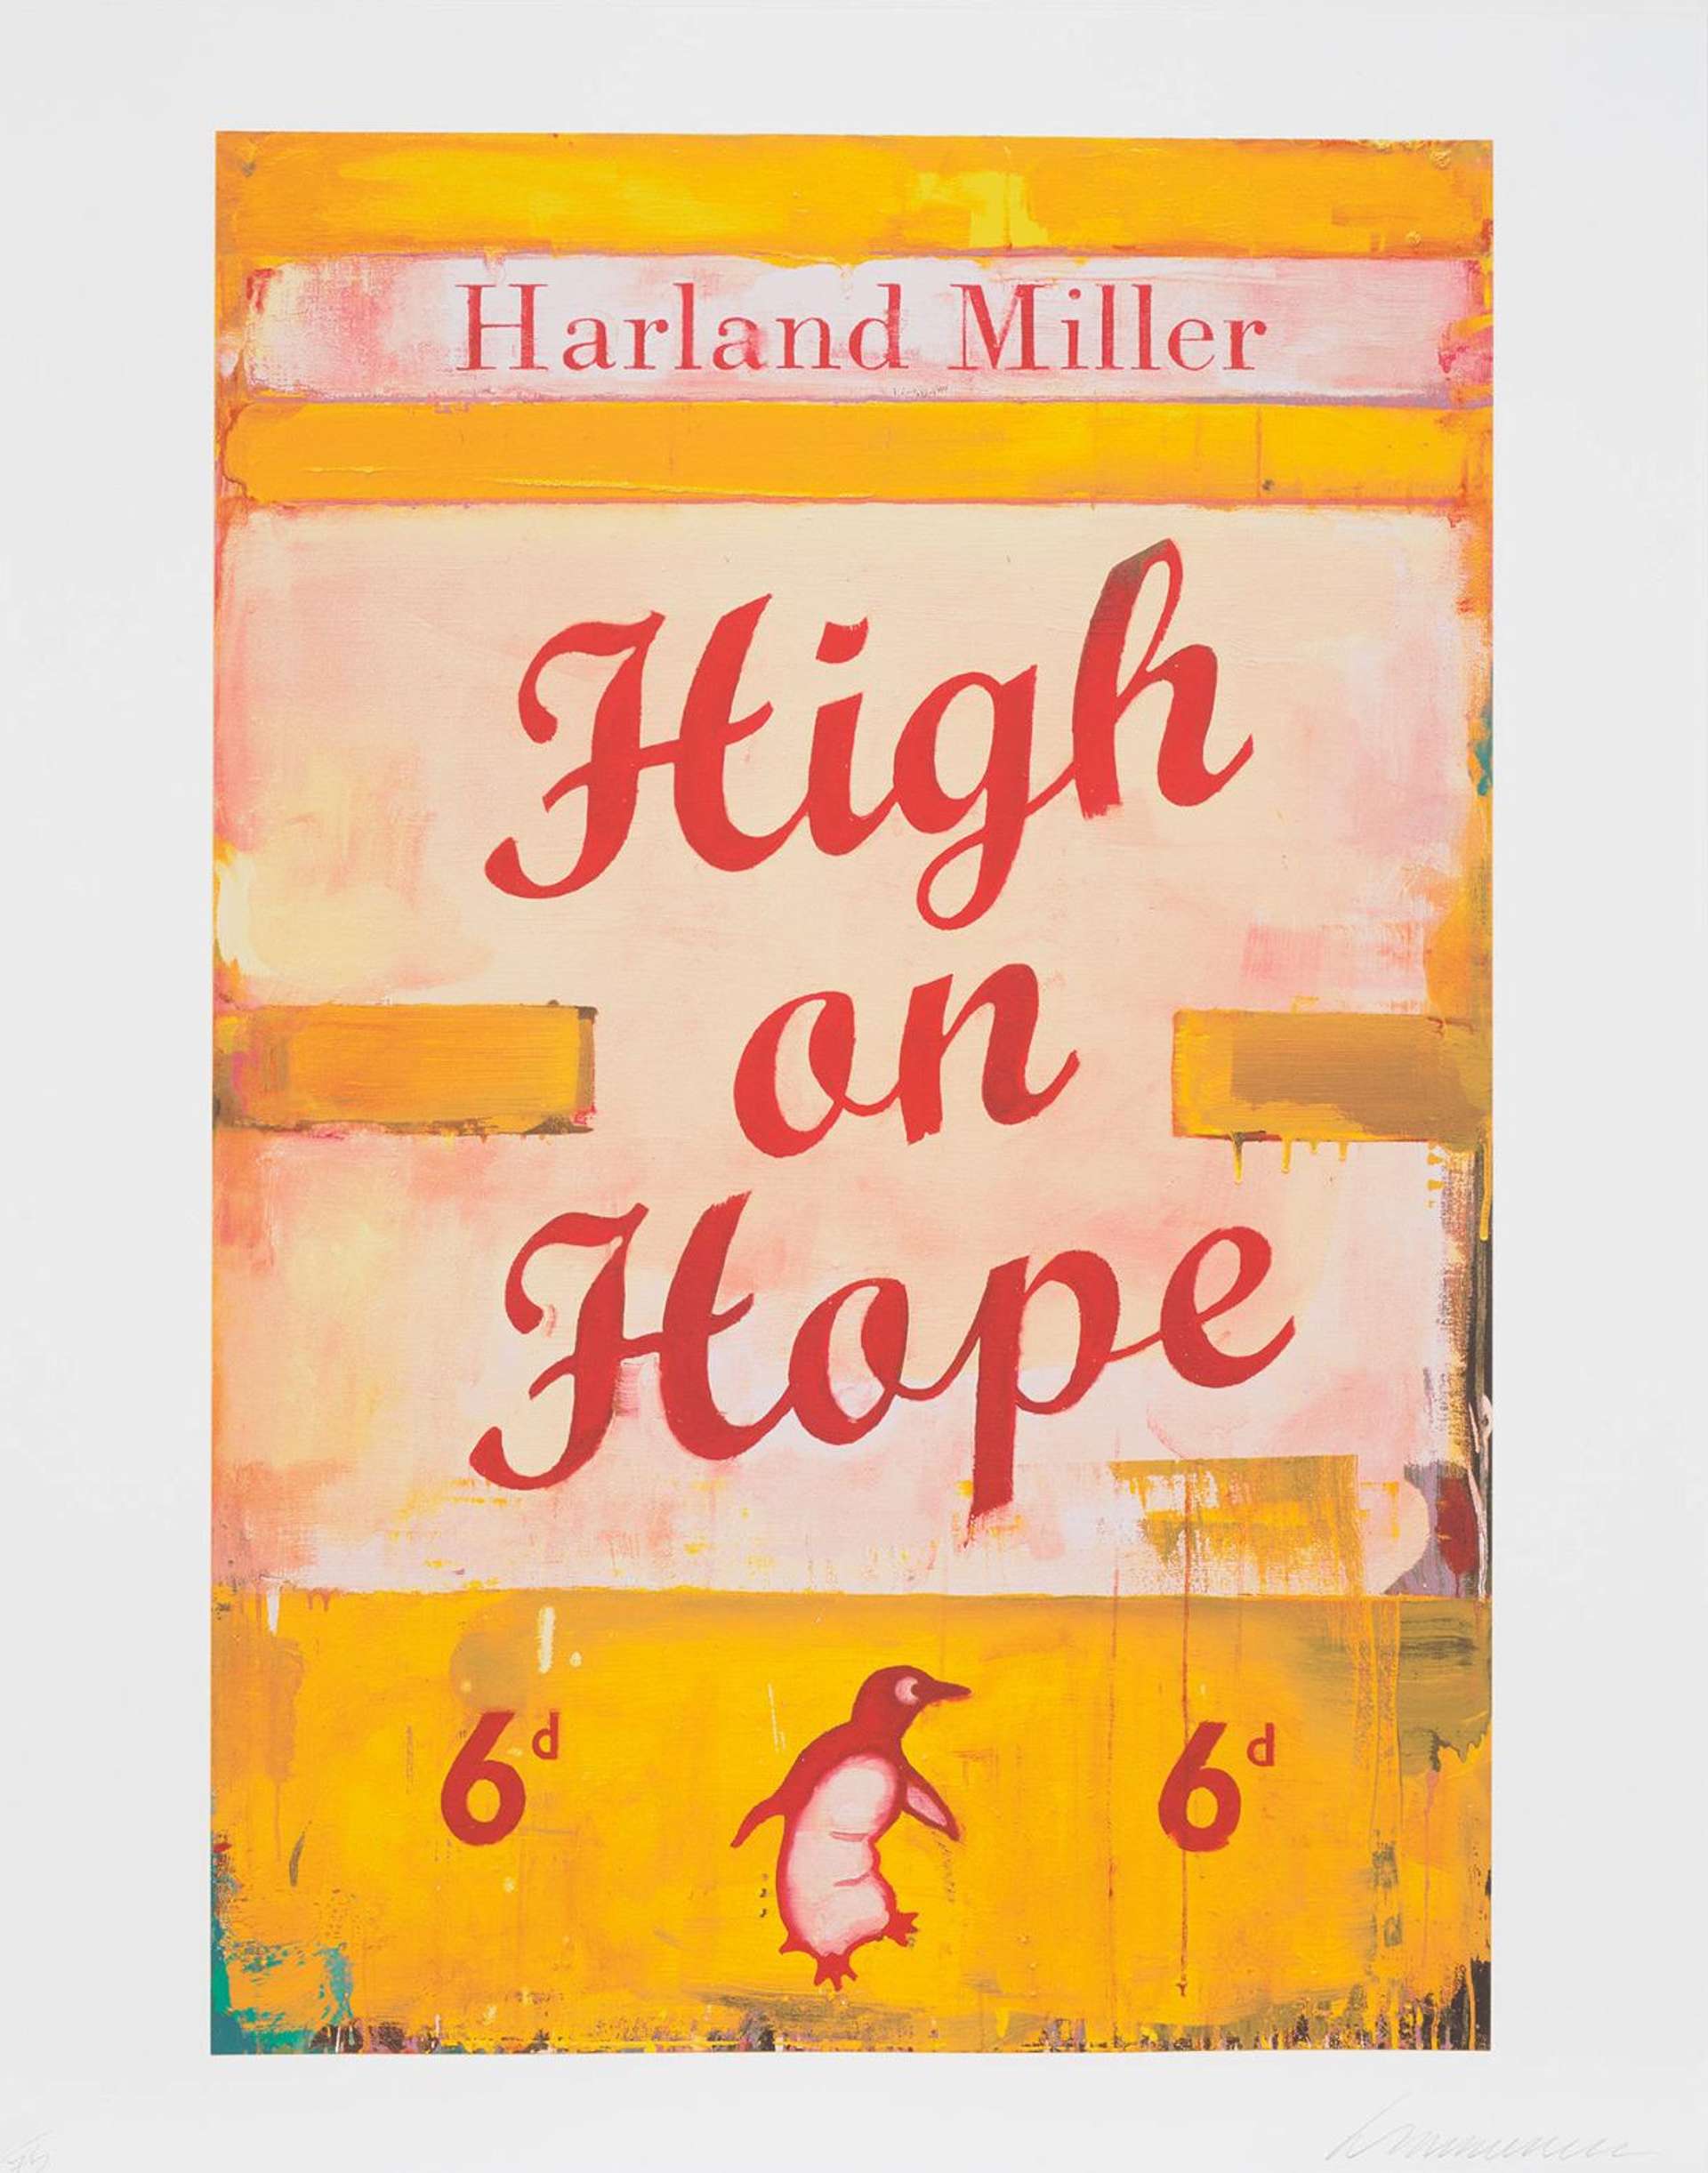 In High on Hope, Miller envisions Penguin publisher’s post-war graphics, choosing to employ the most conventional paperback colour of all; orange. The book has its title written in elaborate lettering.